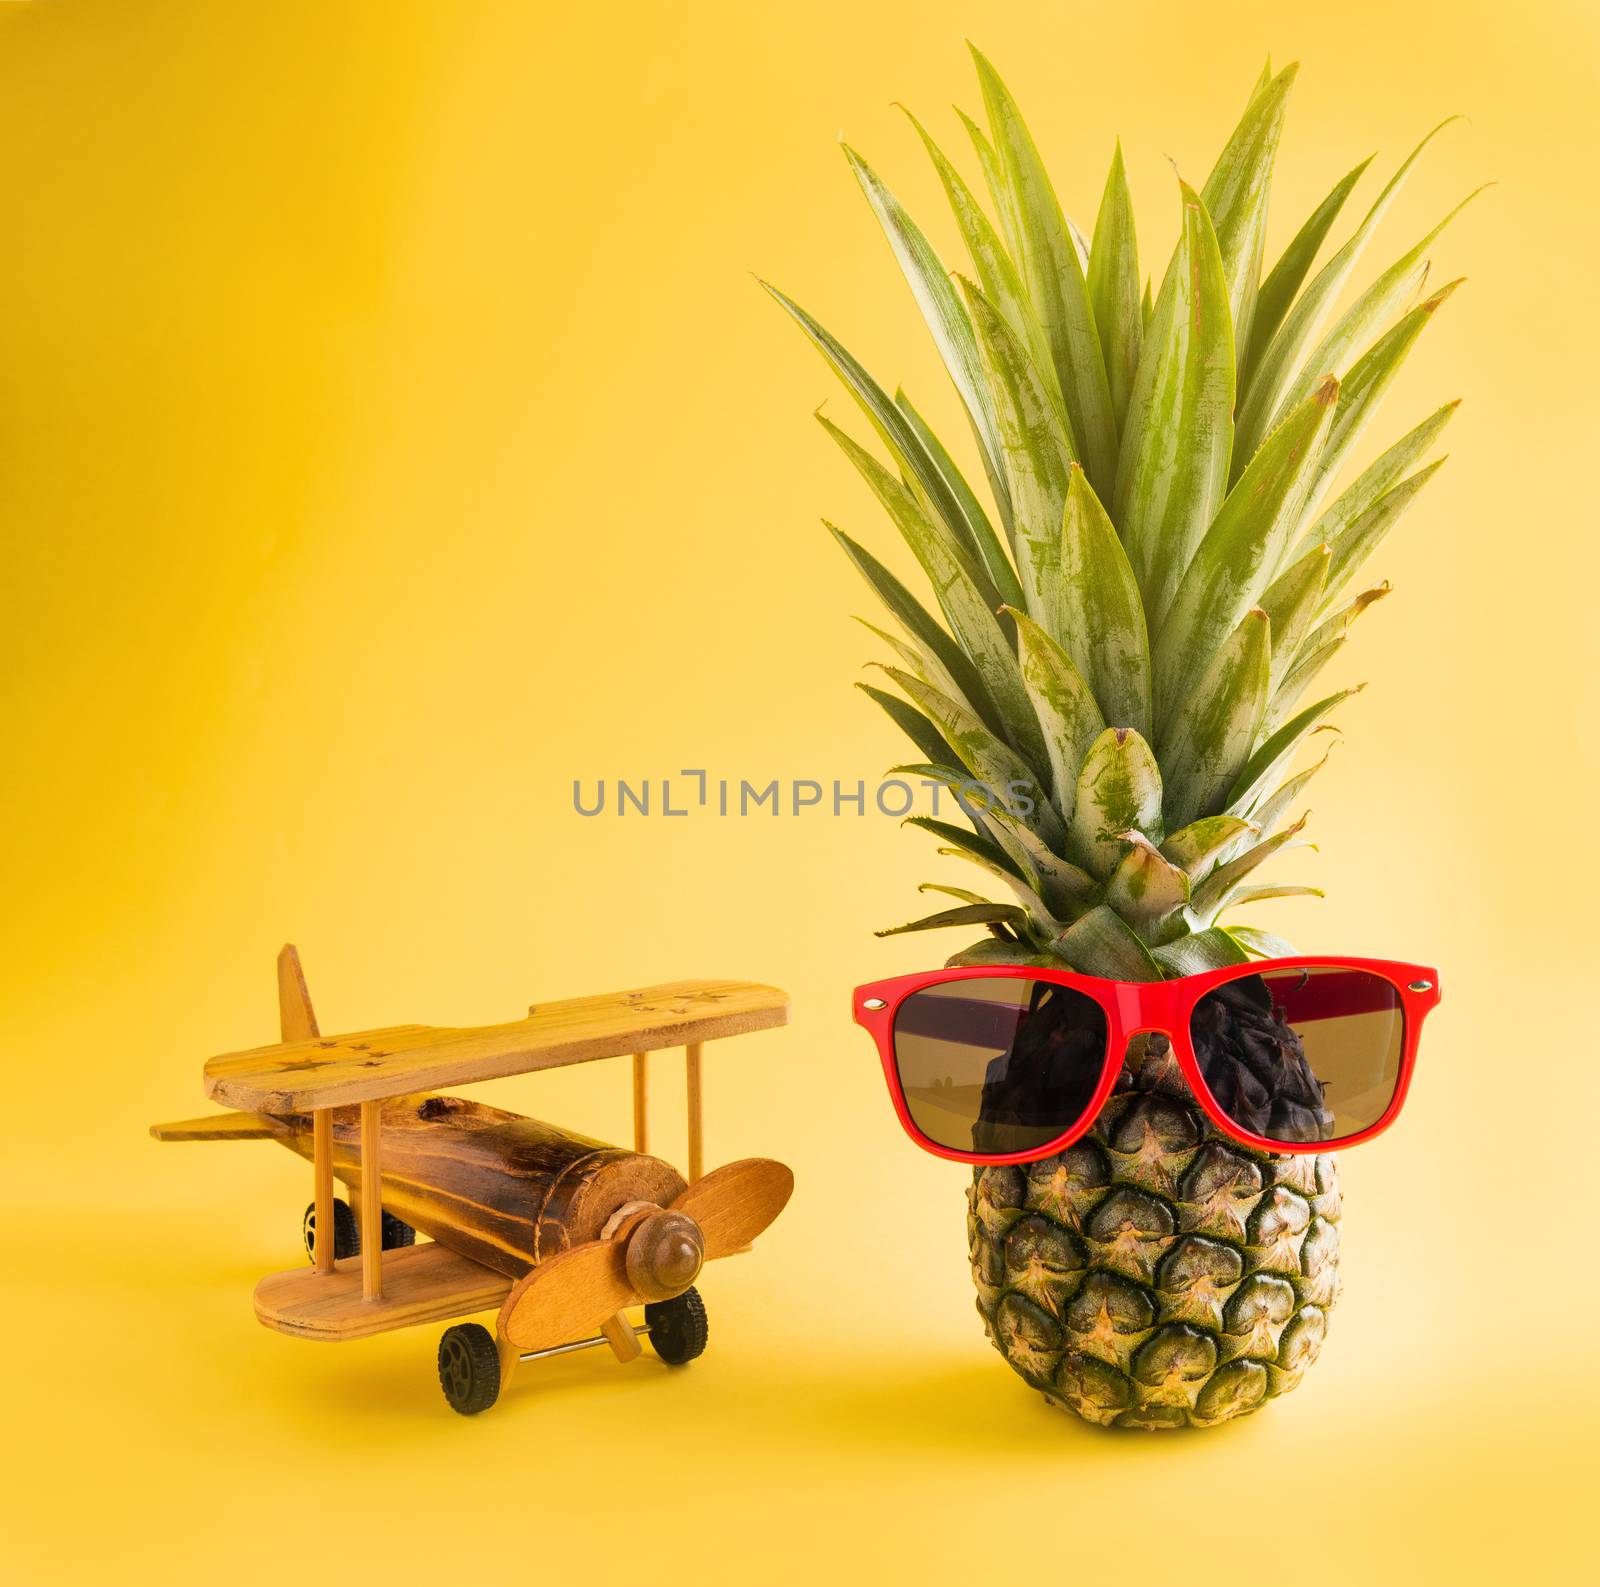 pineapple in sunglasses stands with a model plane by Sorapop